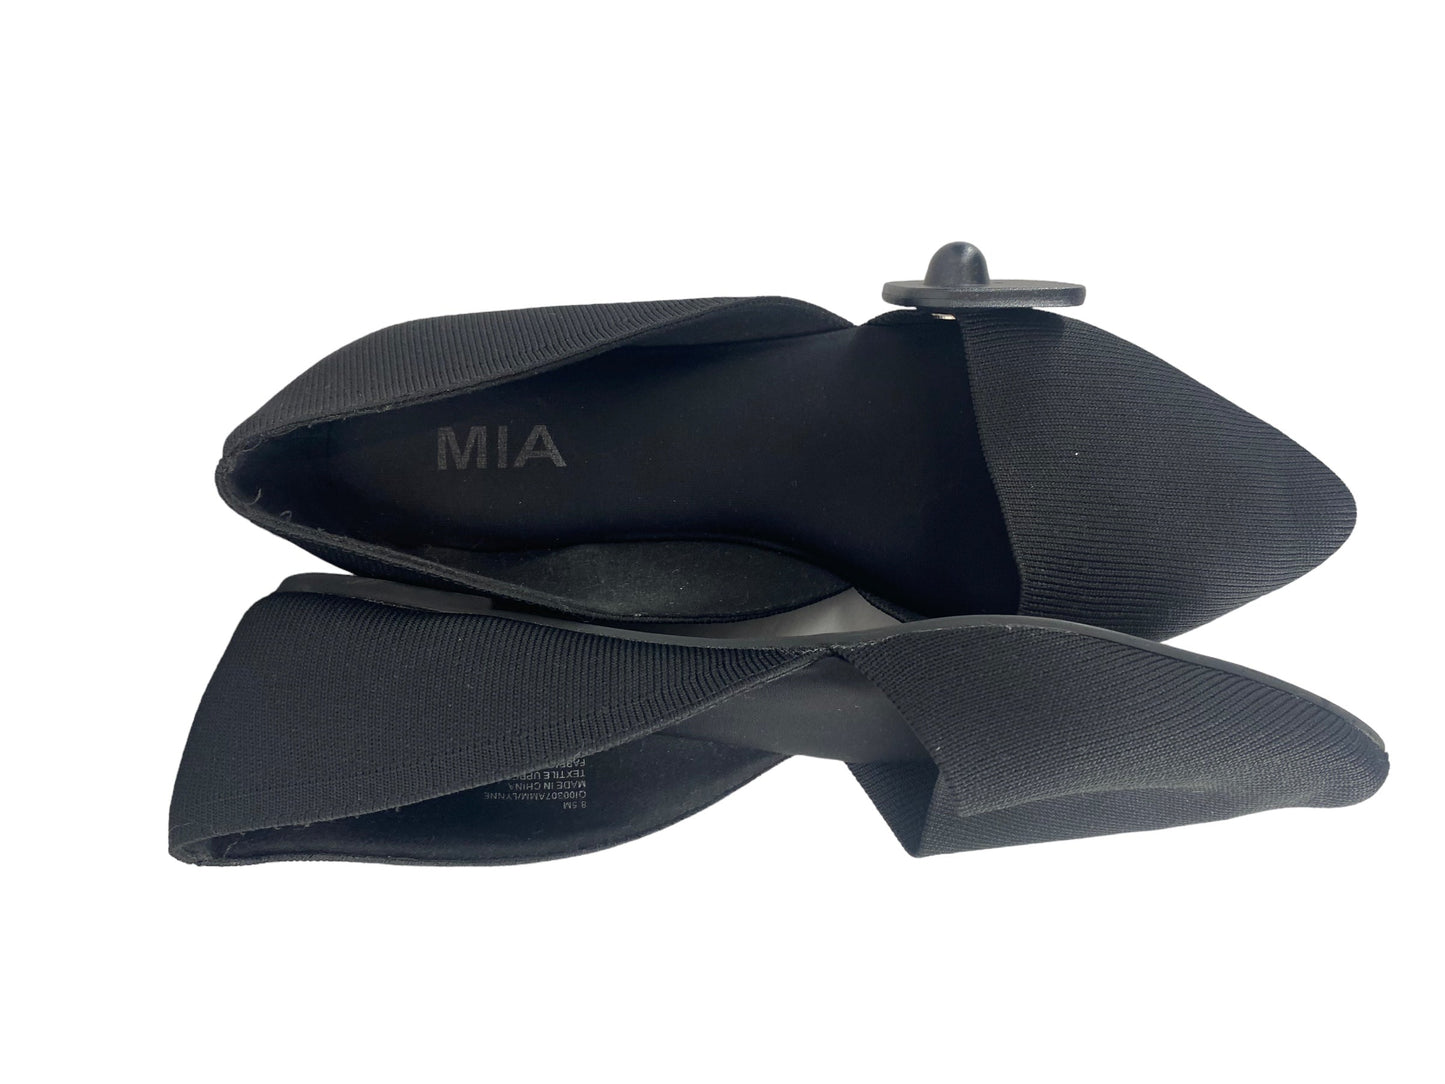 Shoes Flats By Mia  Size: 8.5